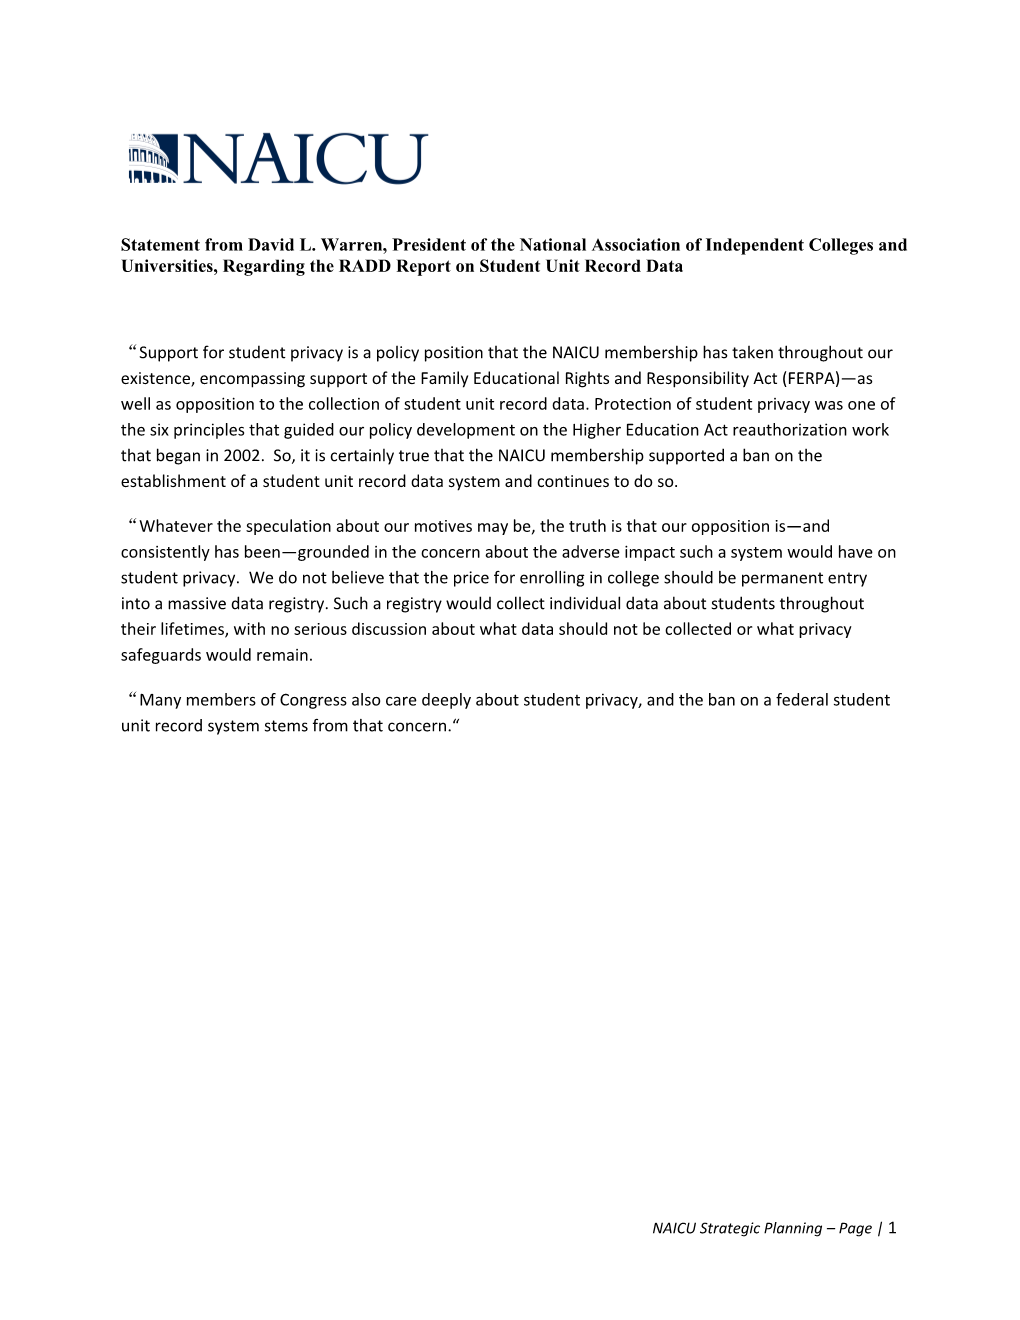 Statement from David L. Warren, President of the National Association of Independent Colleges